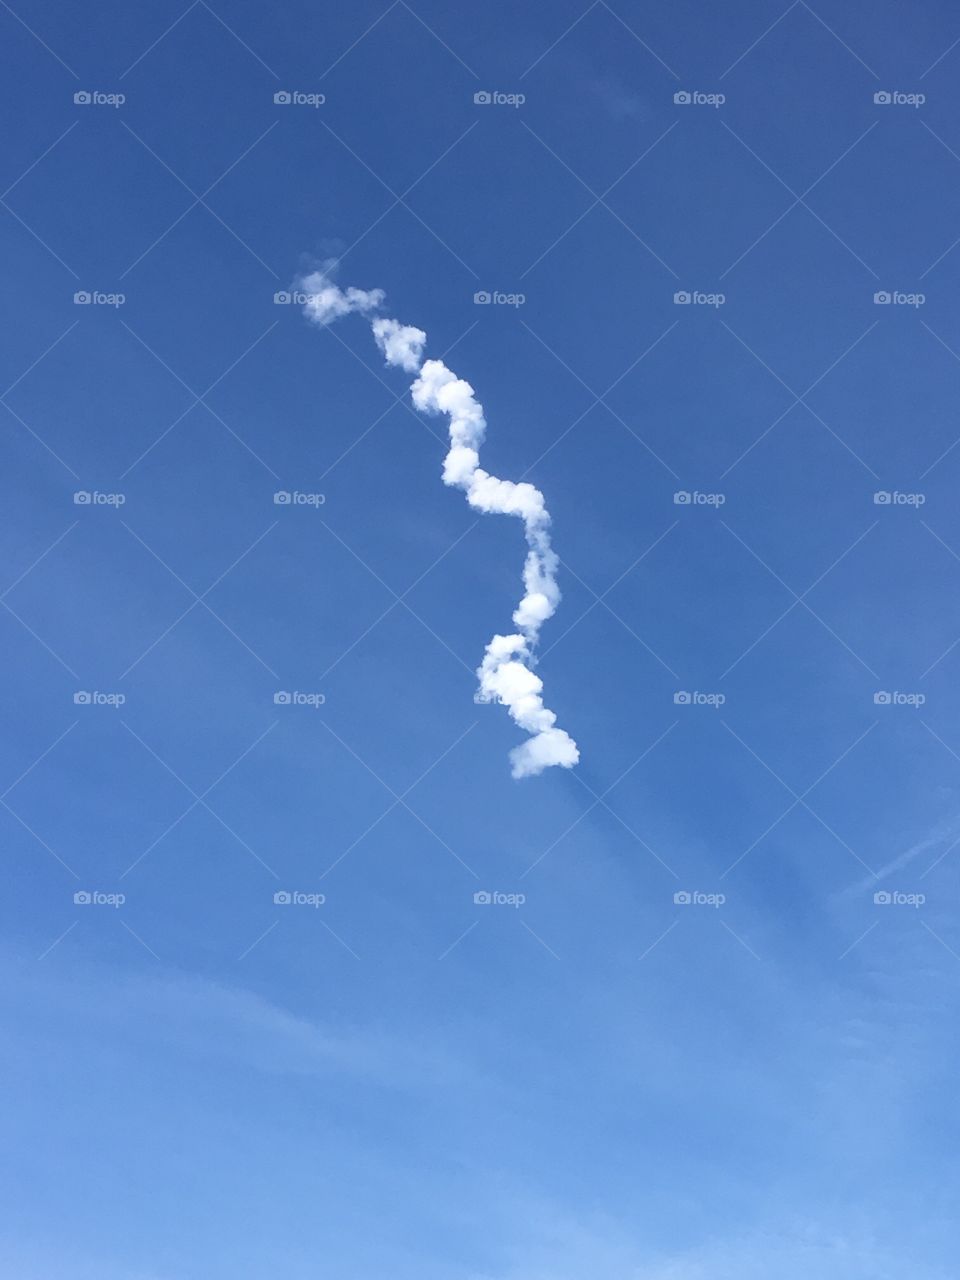 Rocket launch SpaceX cape Canaveral Florida